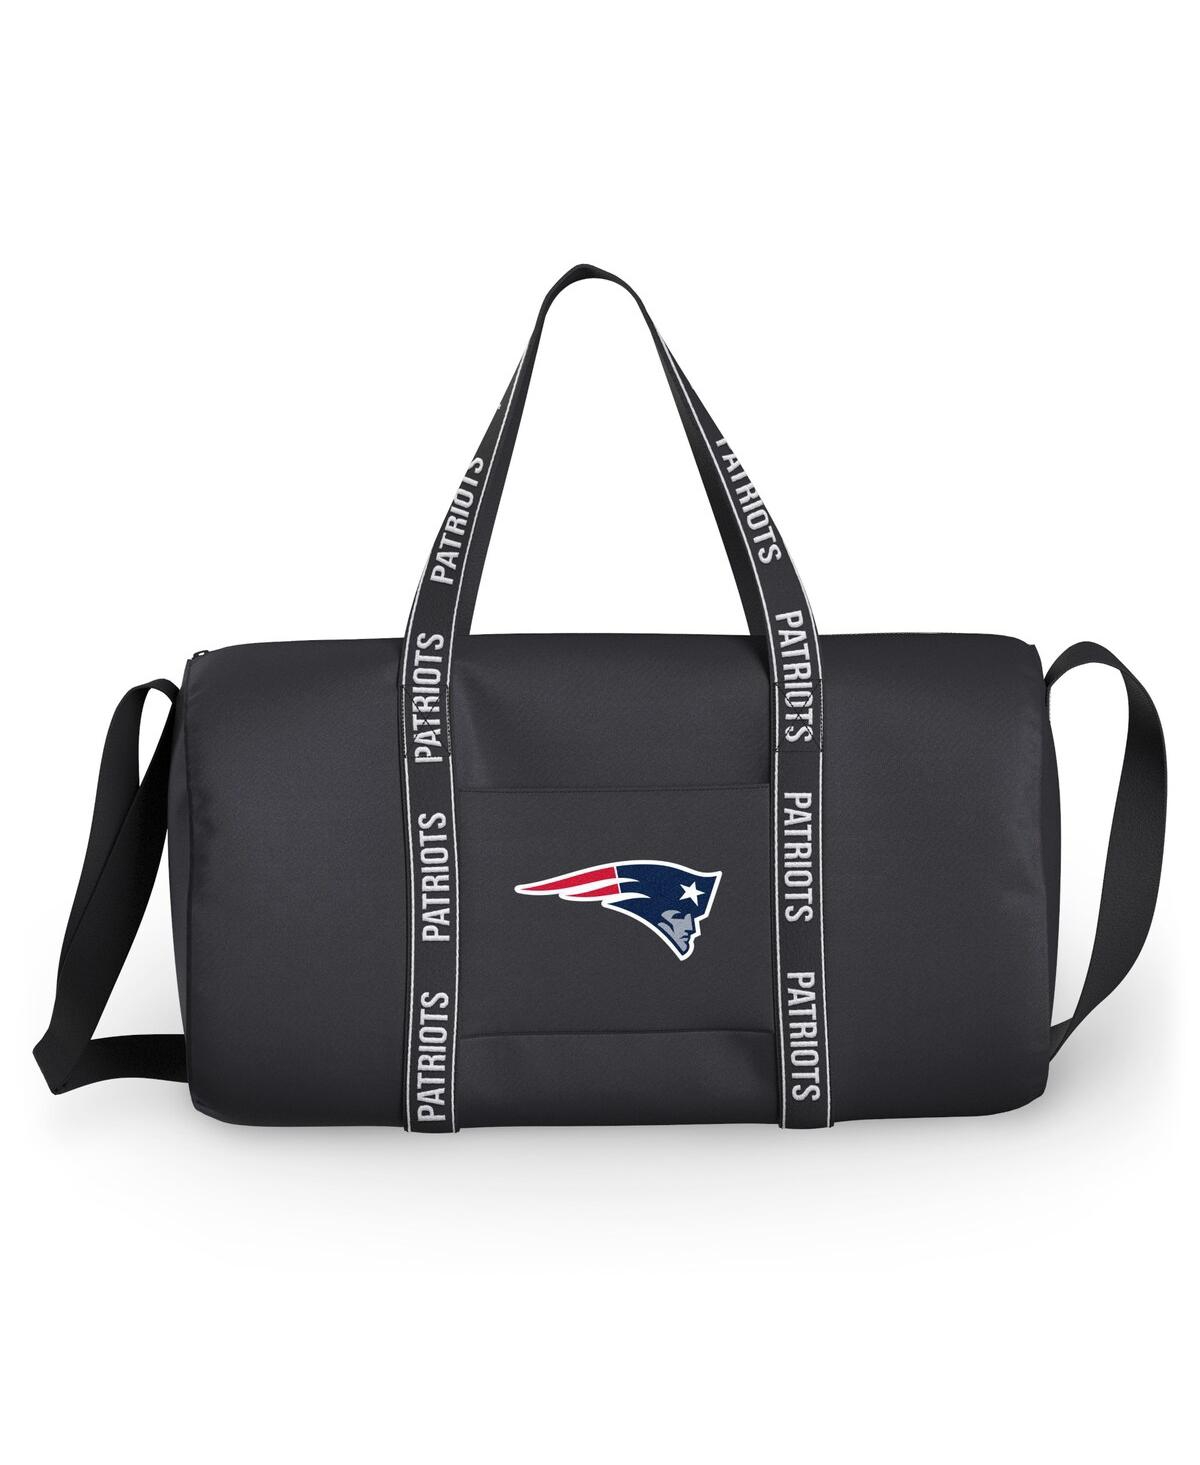 Men's and Women's Wear by Erin Andrews New England Patriots Gym Duffle Bag - Black